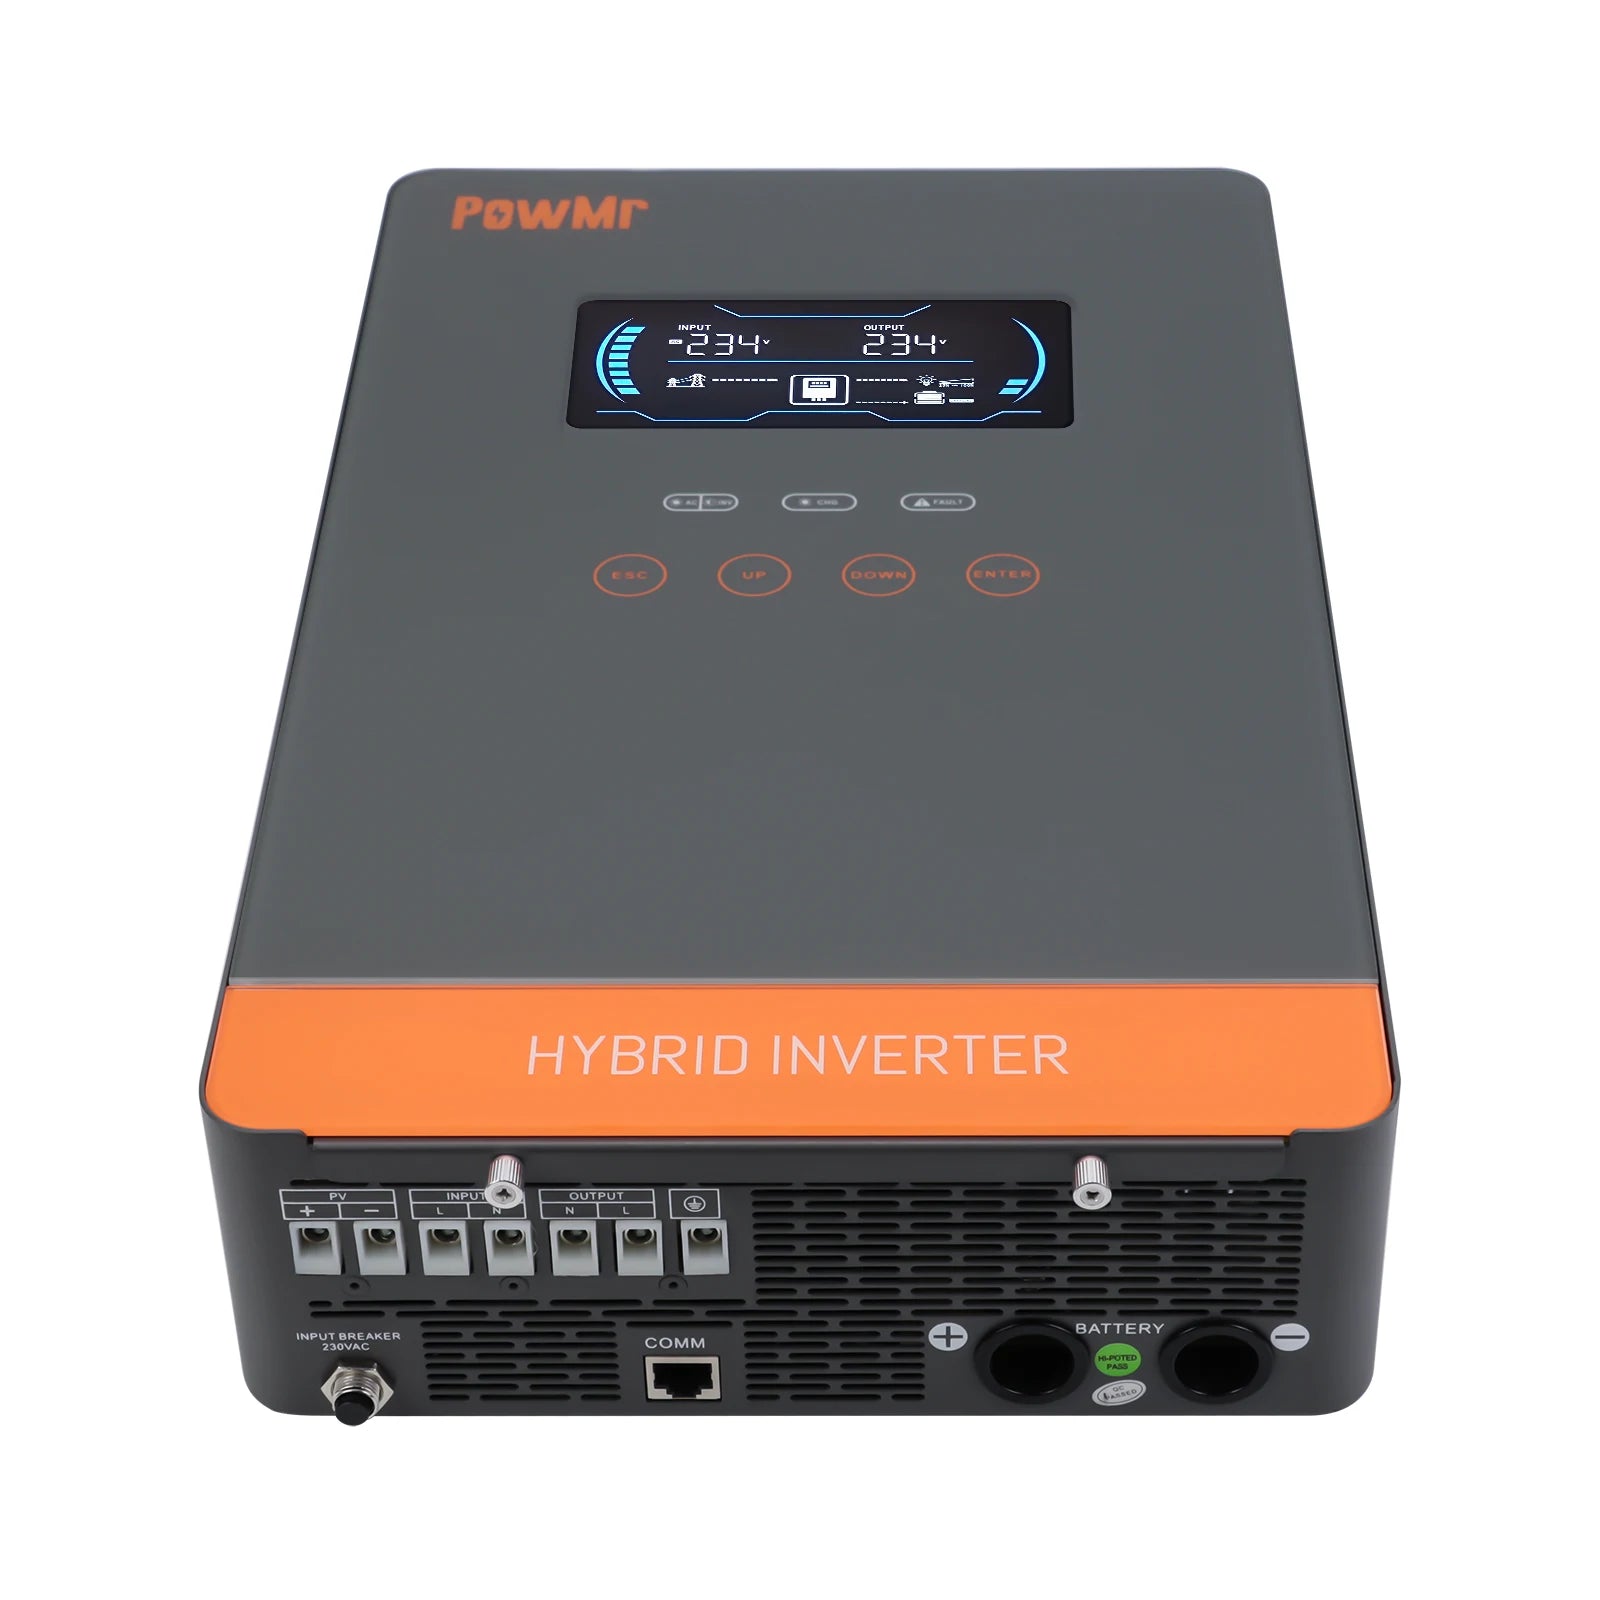 PowMr Solar Inverter, PowMr's solar hybrid inverter converts DC power to pure sine wave AC, suitable for grid-tied or off-grid use.